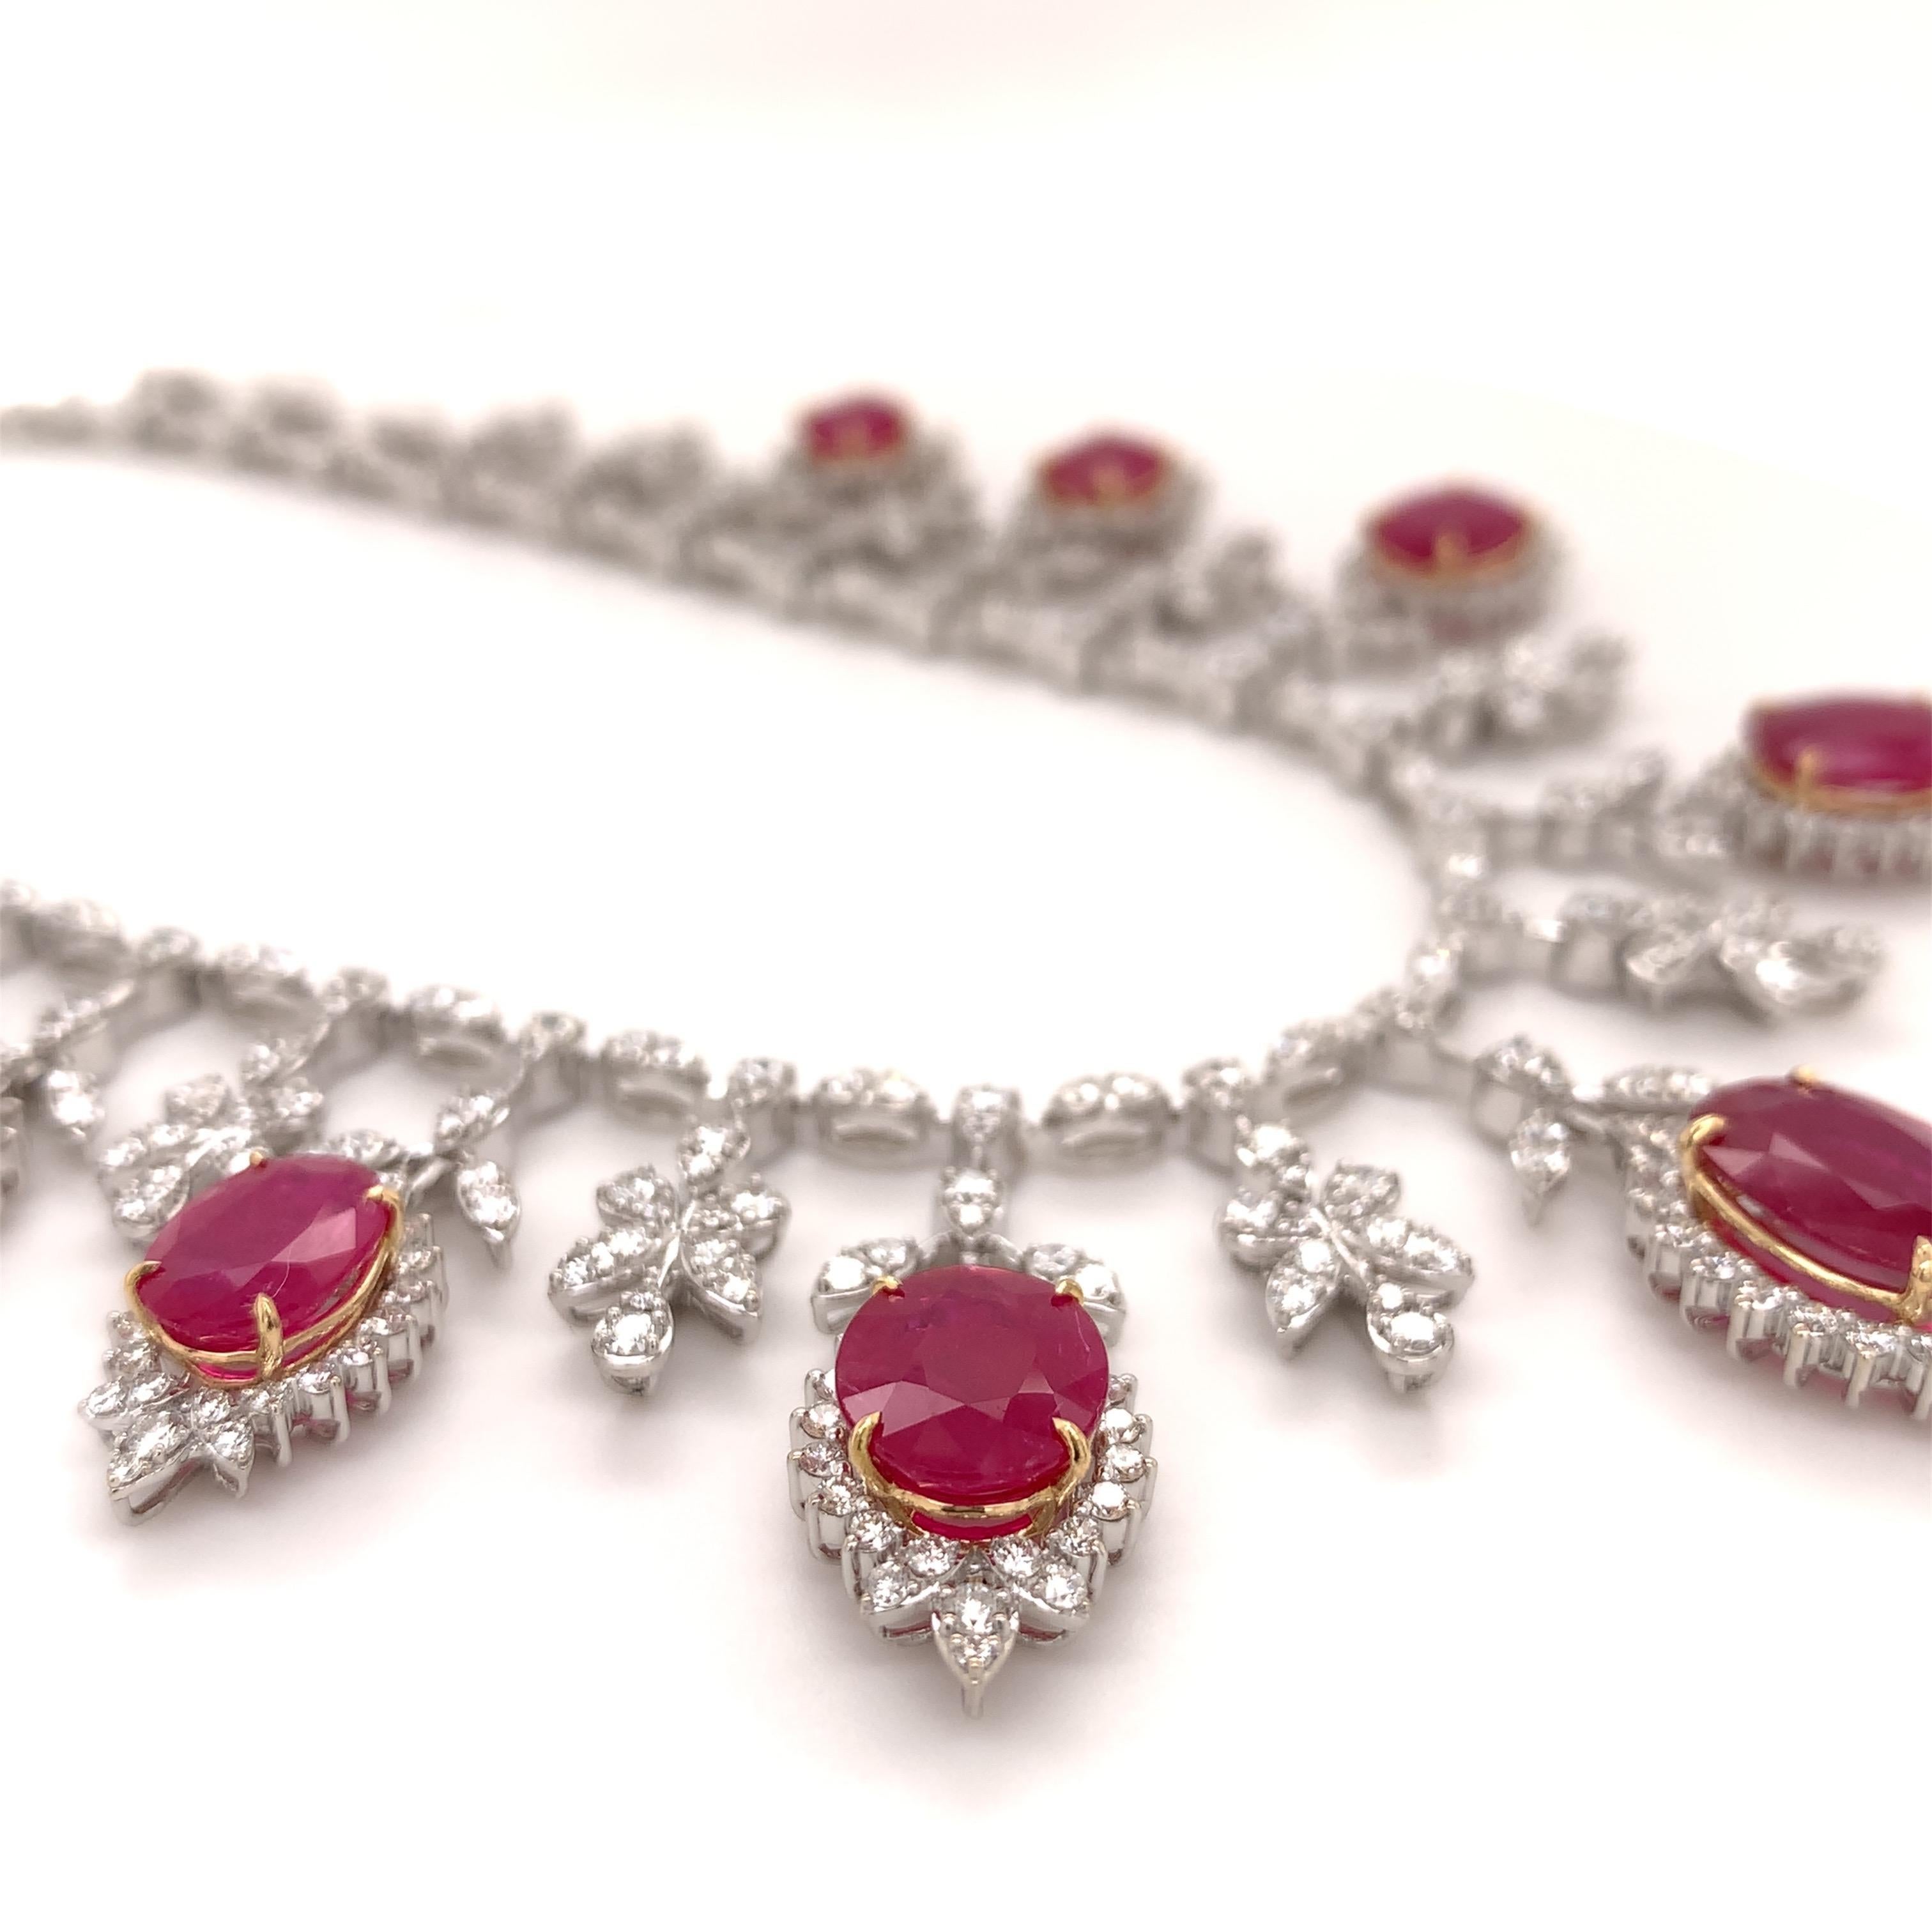 Royal ruby diamond necklace earrings set. High brilliance, oval faceted, 19.32 carats natural rubies mounted in an open basket profile with yellow gold prongs, accented with round brilliant cut diamonds, in dangling drops. Handcrafted breathtaking